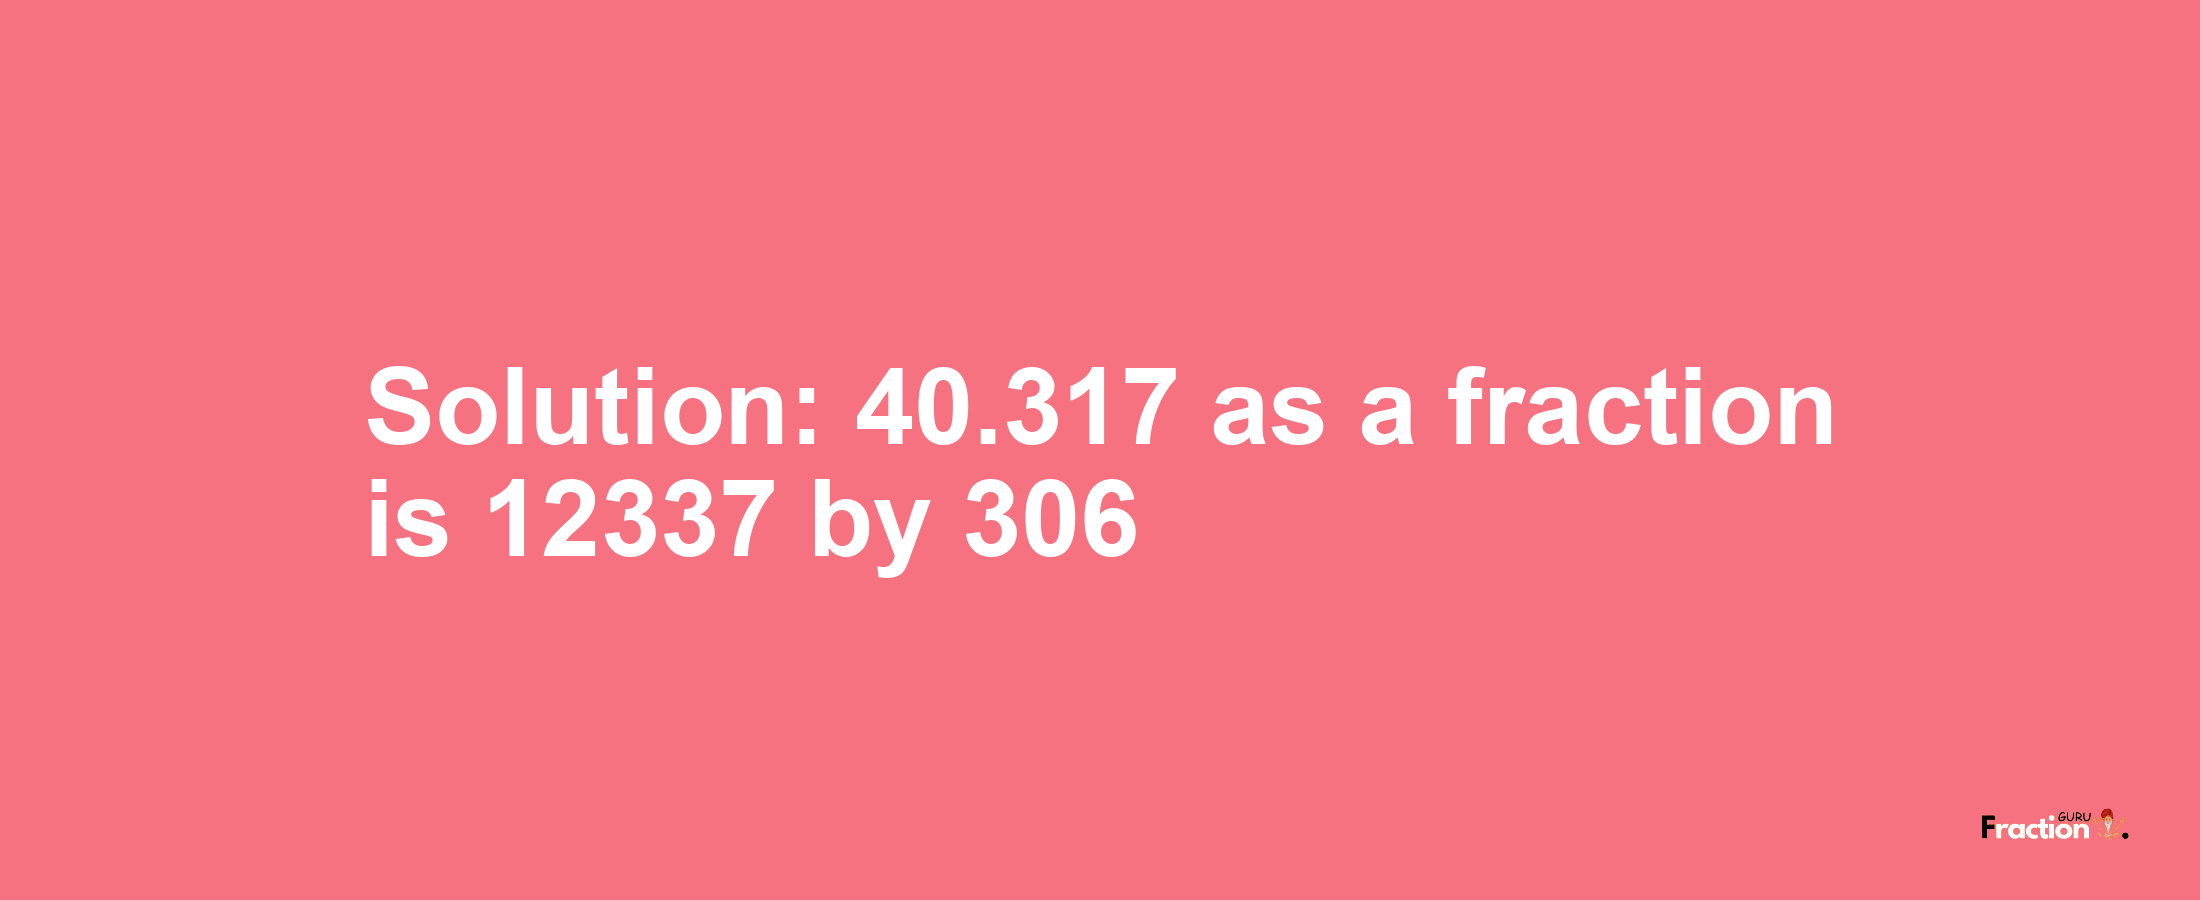 Solution:40.317 as a fraction is 12337/306